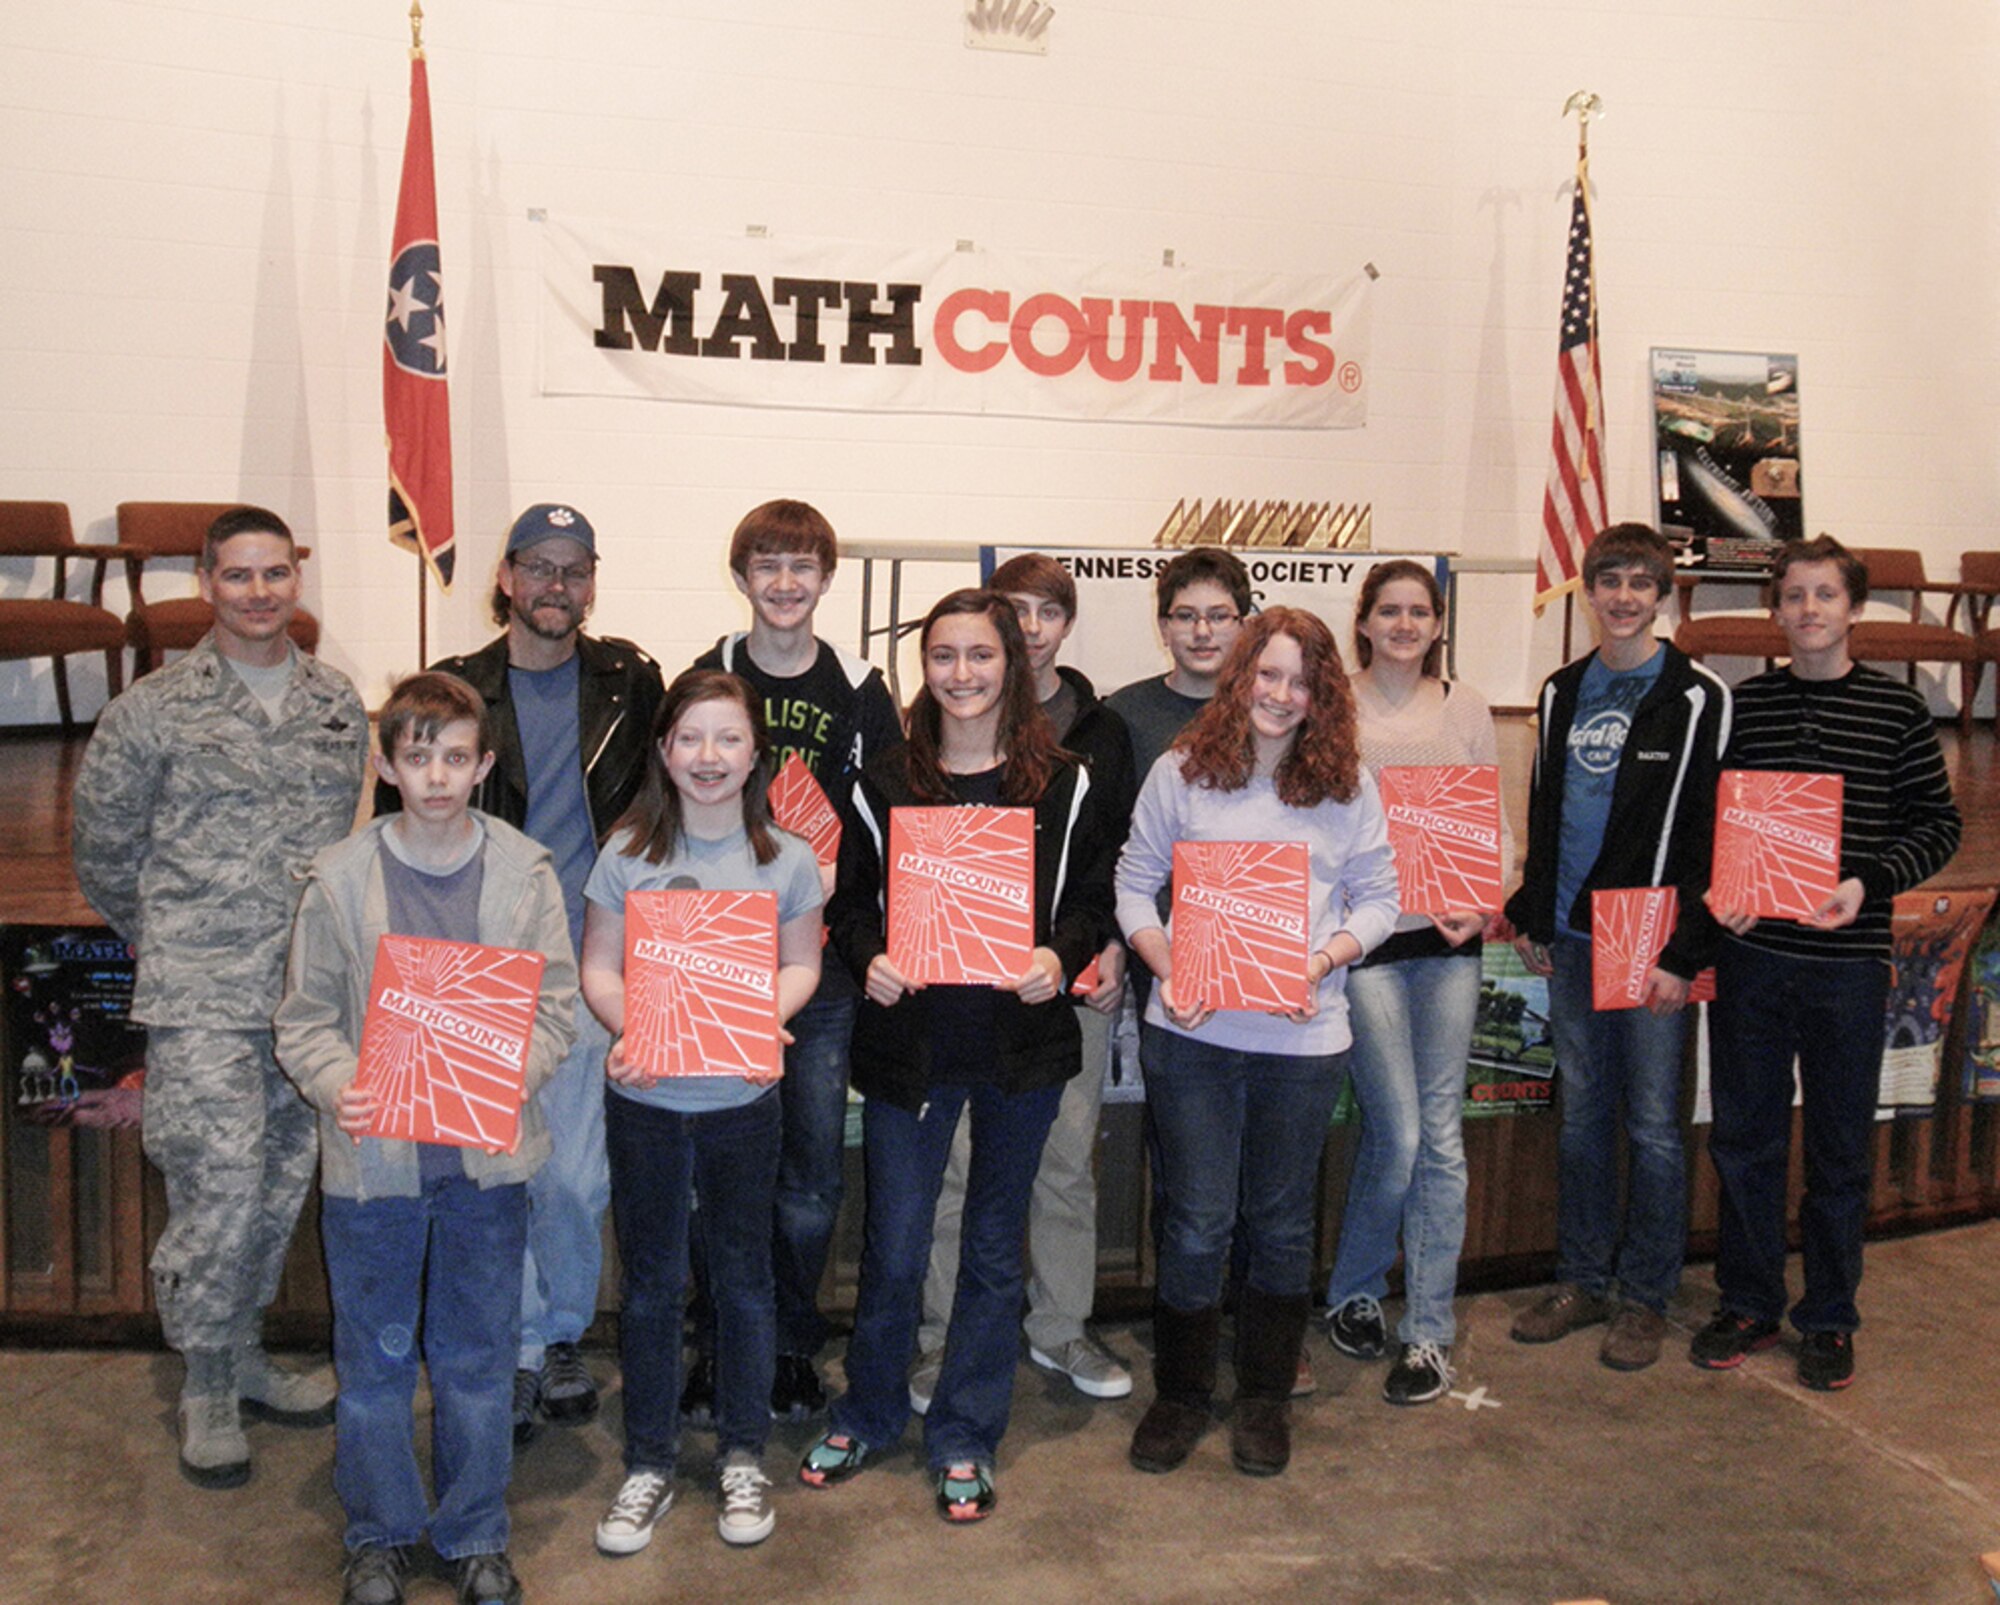 Arnold Engineering Development Complex Commander, Col. Raymond Toth stands with East Middle School students, front row, left to right: 7th graders Noah Weems, Abbie Daniel, Megan Schweitzer and Sarah Schweitzer.  Back row, left to right: Trent Stout, coach, 8th graders Andrew Mares and Caden Throneberry, Cooper Yoder, 7th grader, 8th graders Kathryn Brosemer, Spencer Baxter, and William Kuebitz. .(Photo provided)